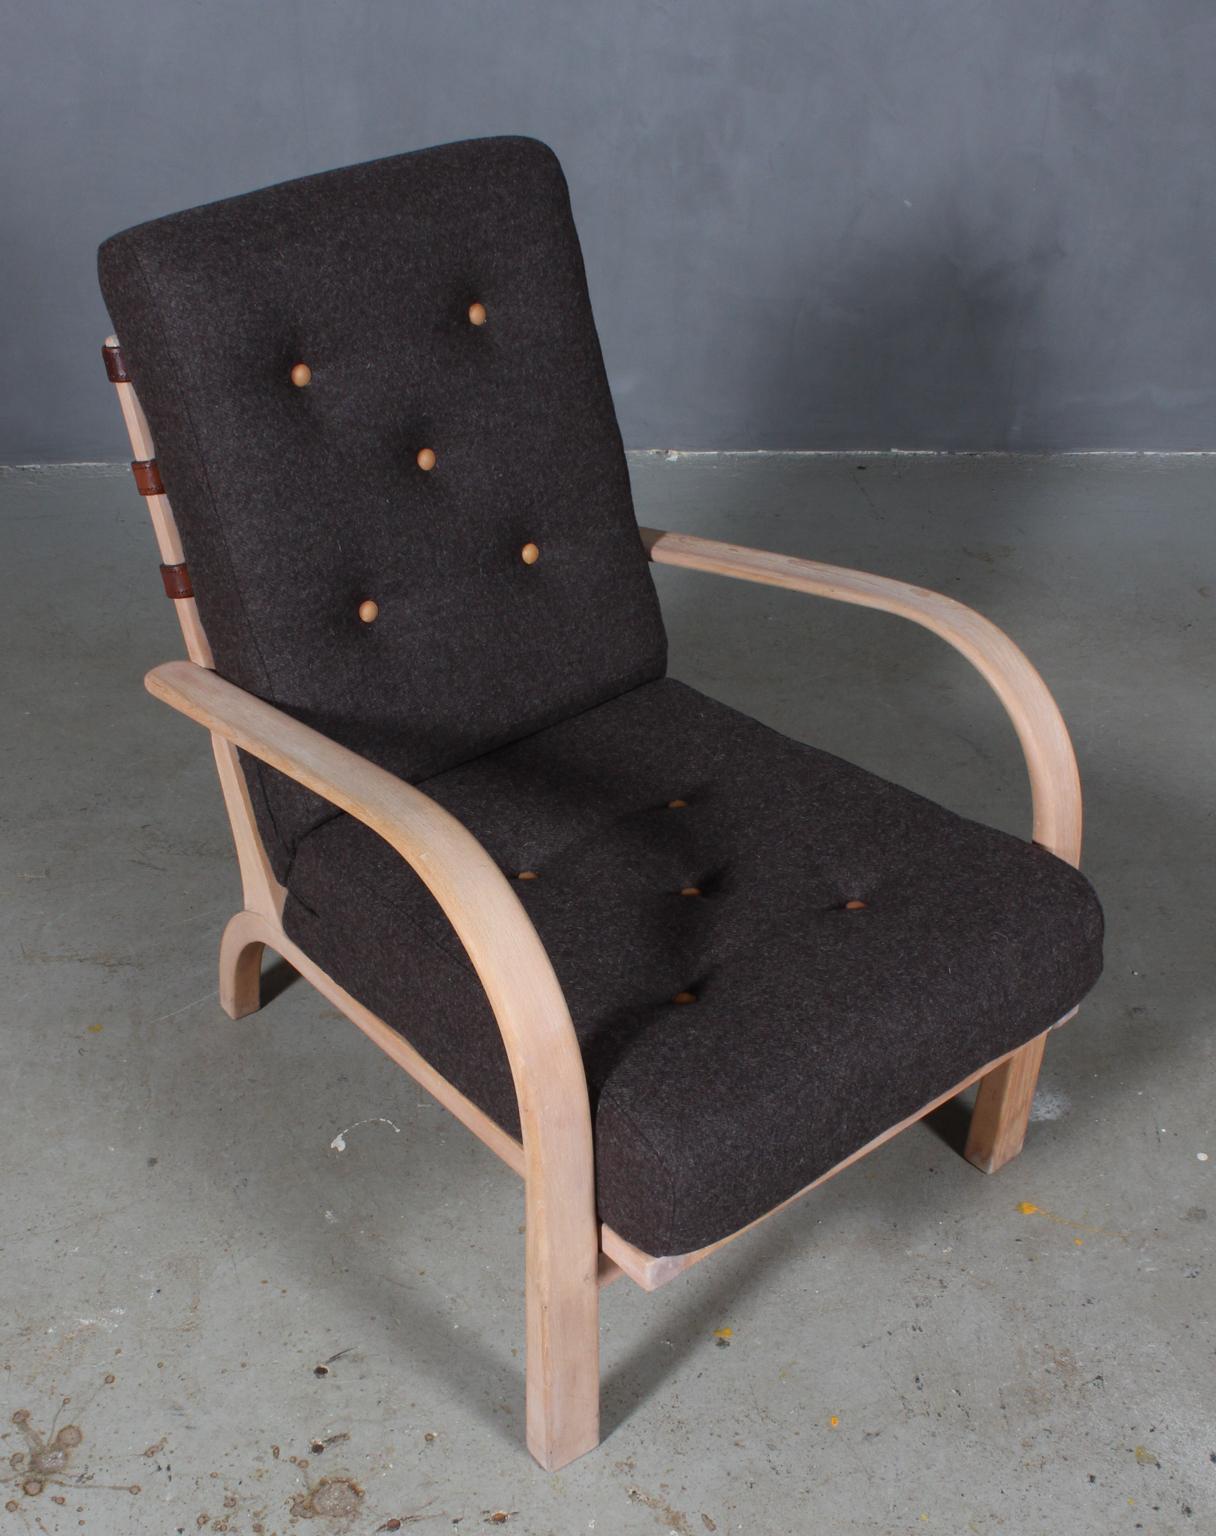 Ernst Heilmann Sevaldsen for Fritz Hansen lounge chair with frame of beech.

New upholstered with 100 % New Zealand Divina wool and vintage aniline leather.

Original leather straps in the back.

Made by Fritz Hansen in the 1930s.